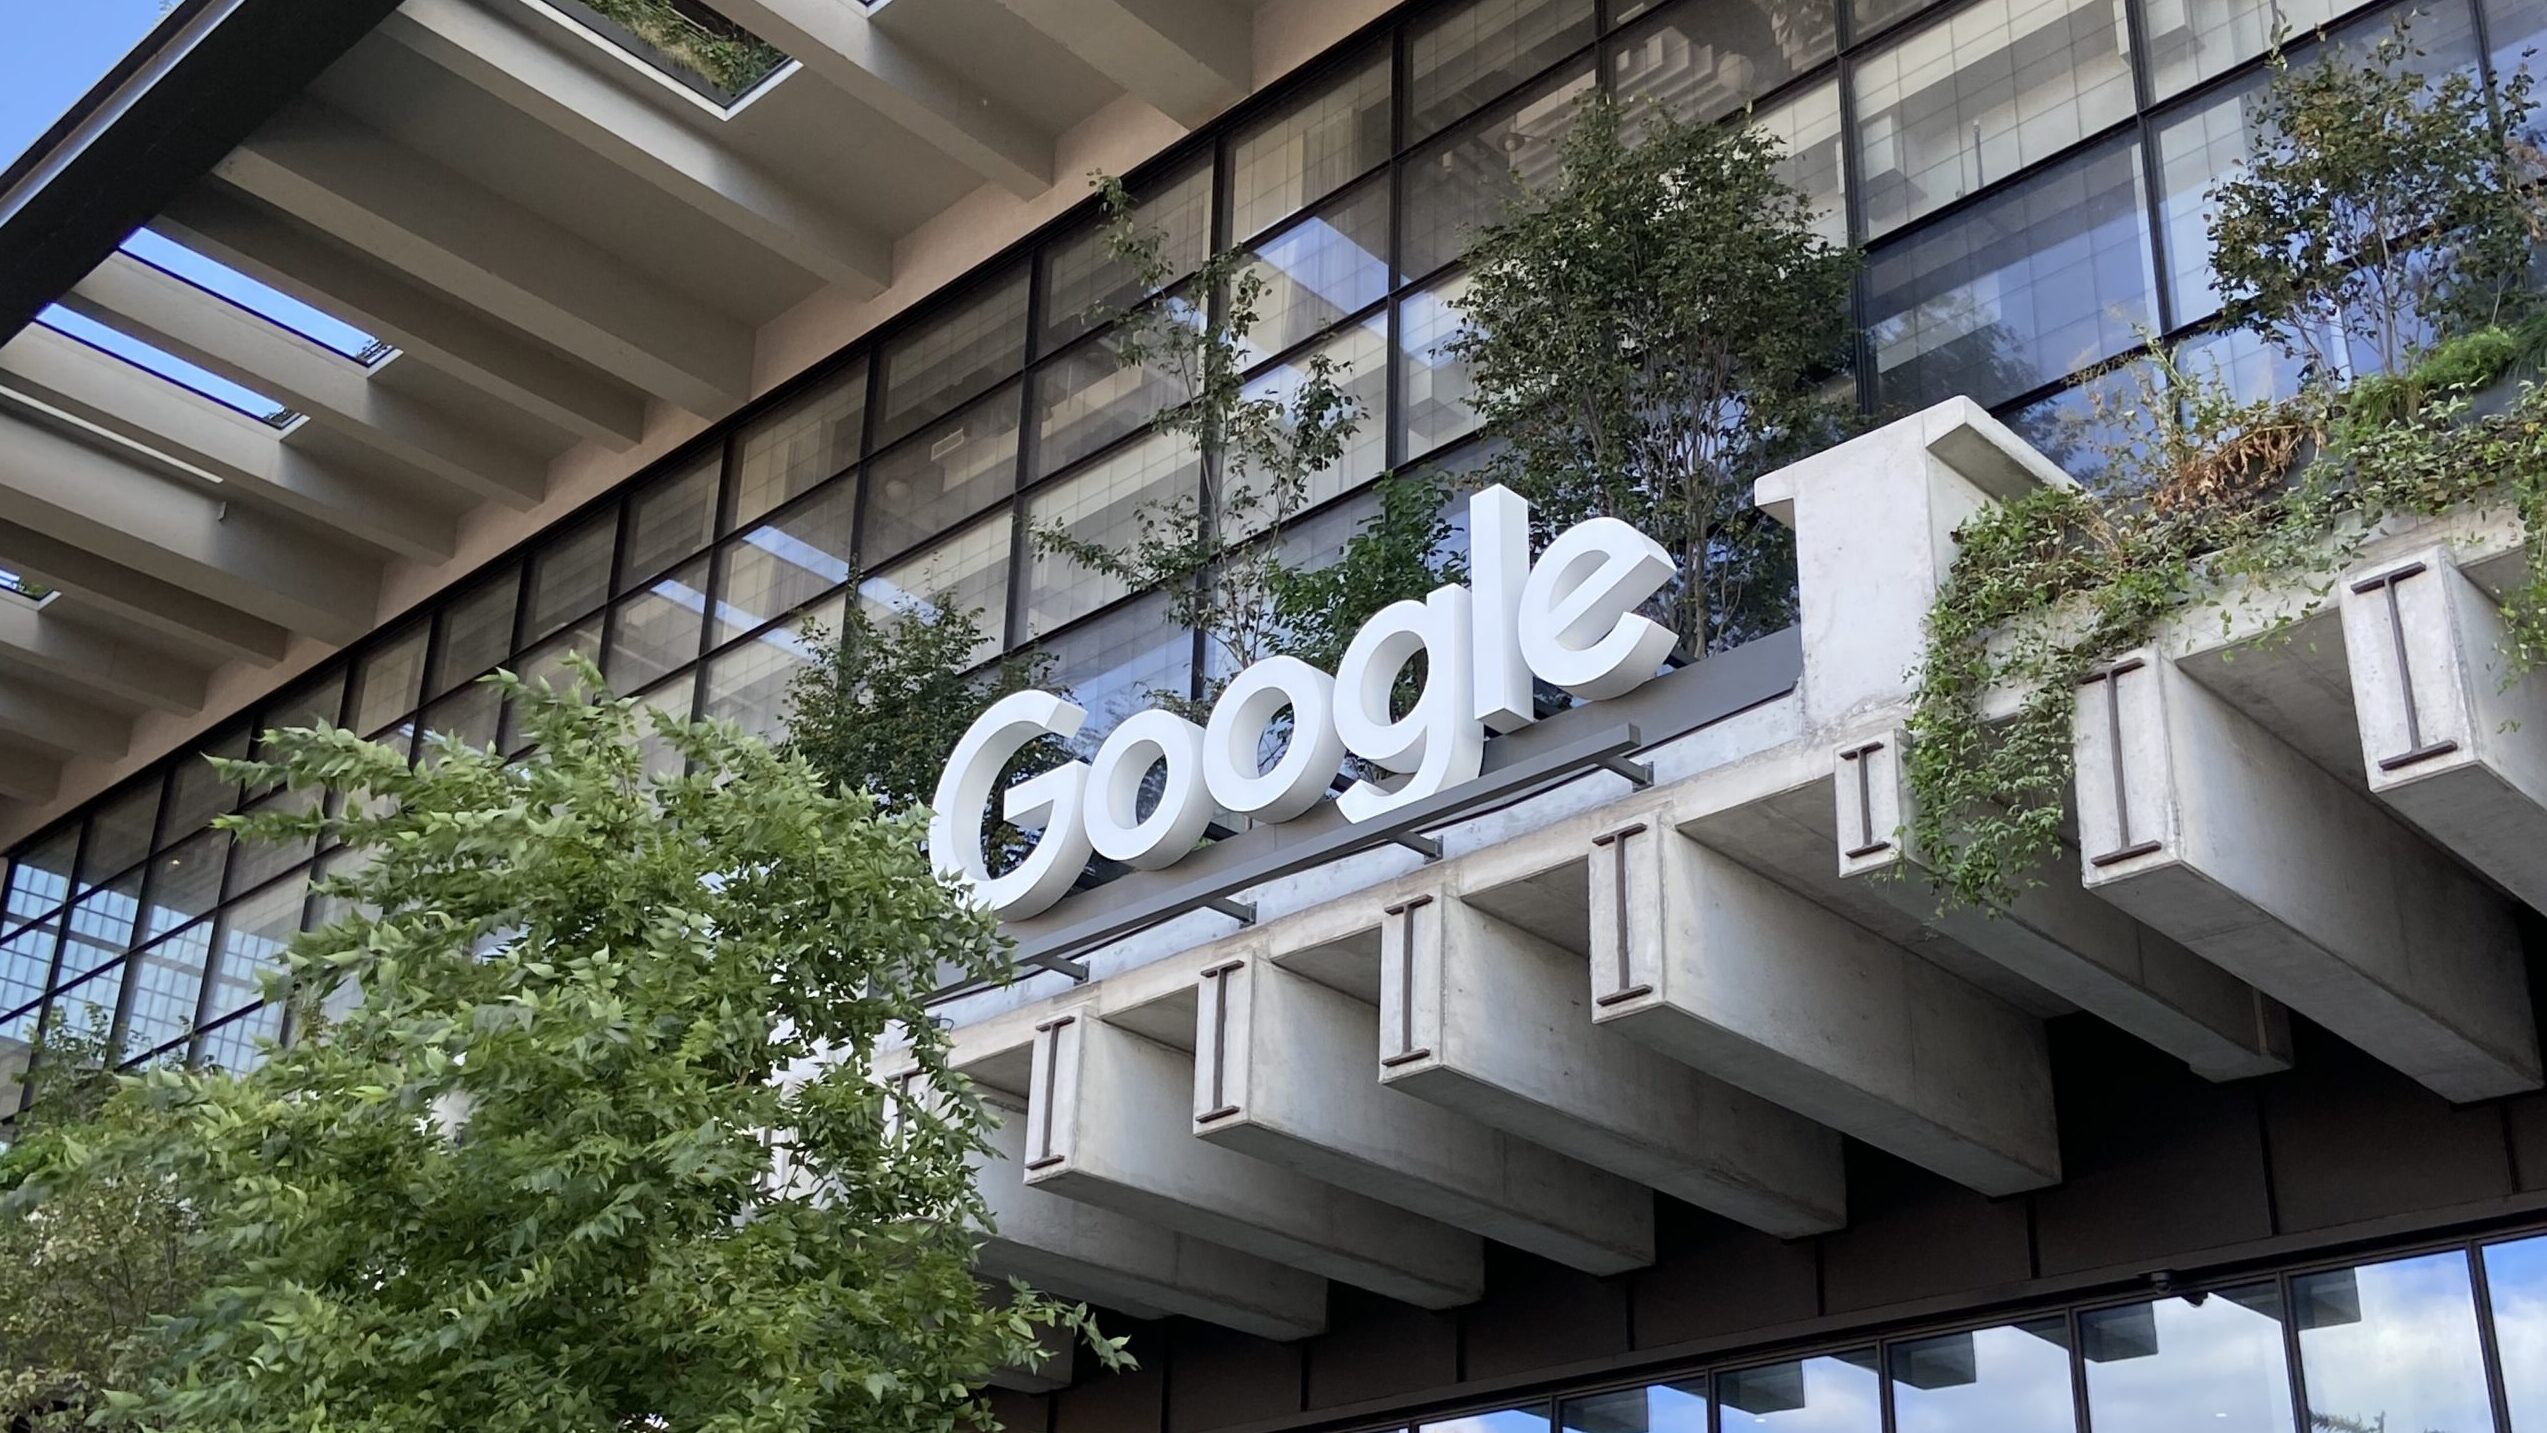 Google launches its most capable’ AI model, Gemini | Microsoft’s investment in OpenAI faces regulatory reviews | BlackRock rolls out GenAI to clients